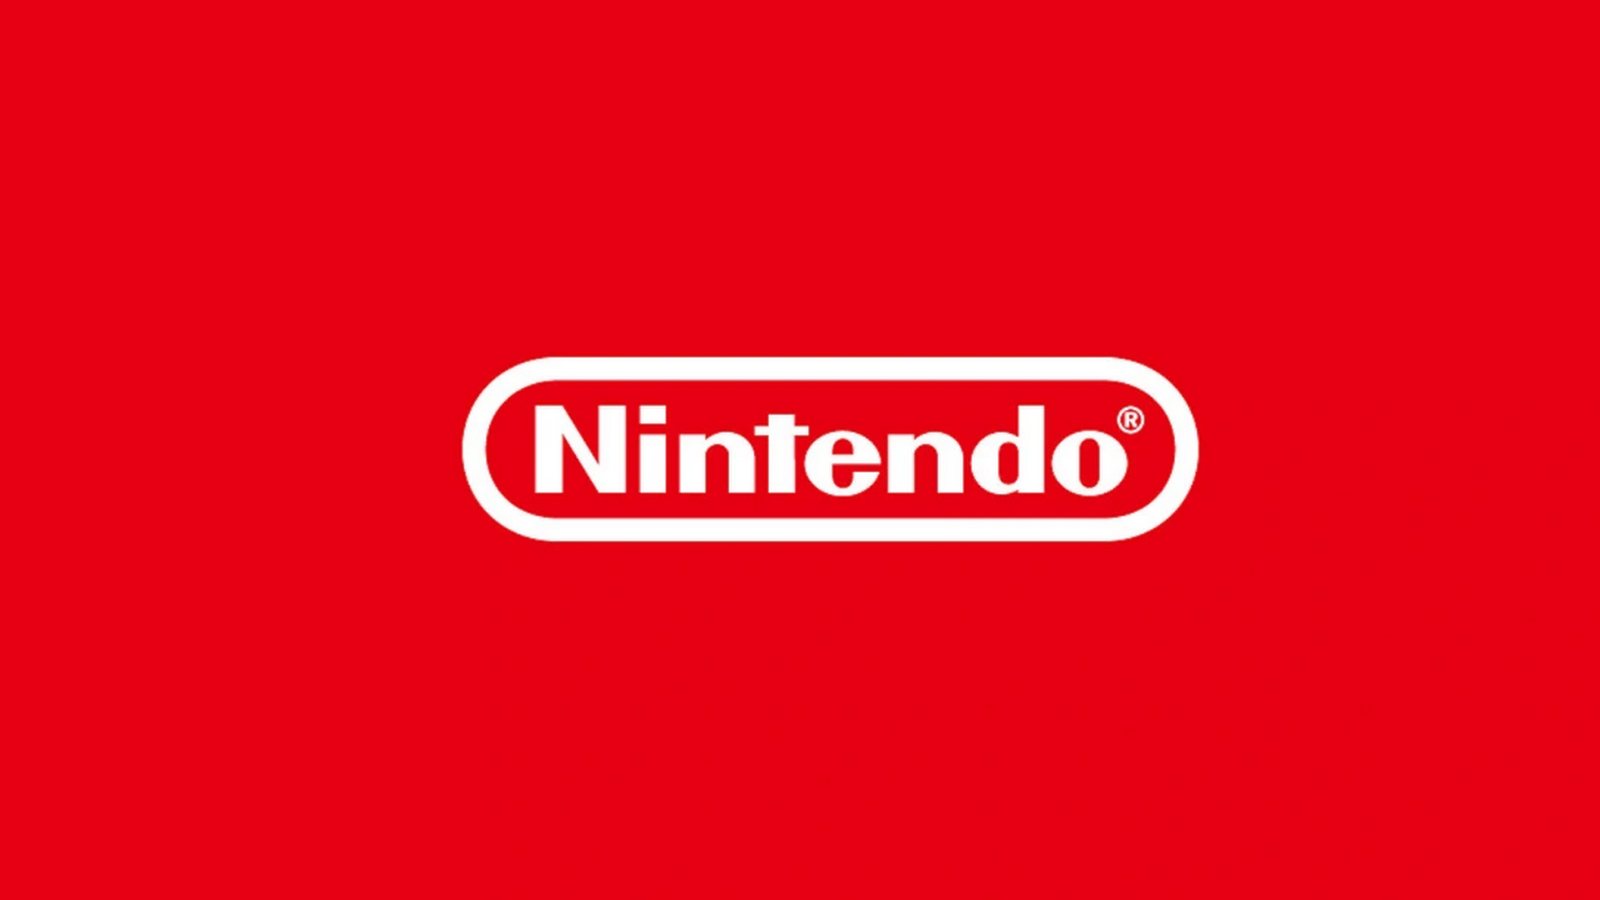 Switch SNES games might be part of tomorrow's Nintendo Direct